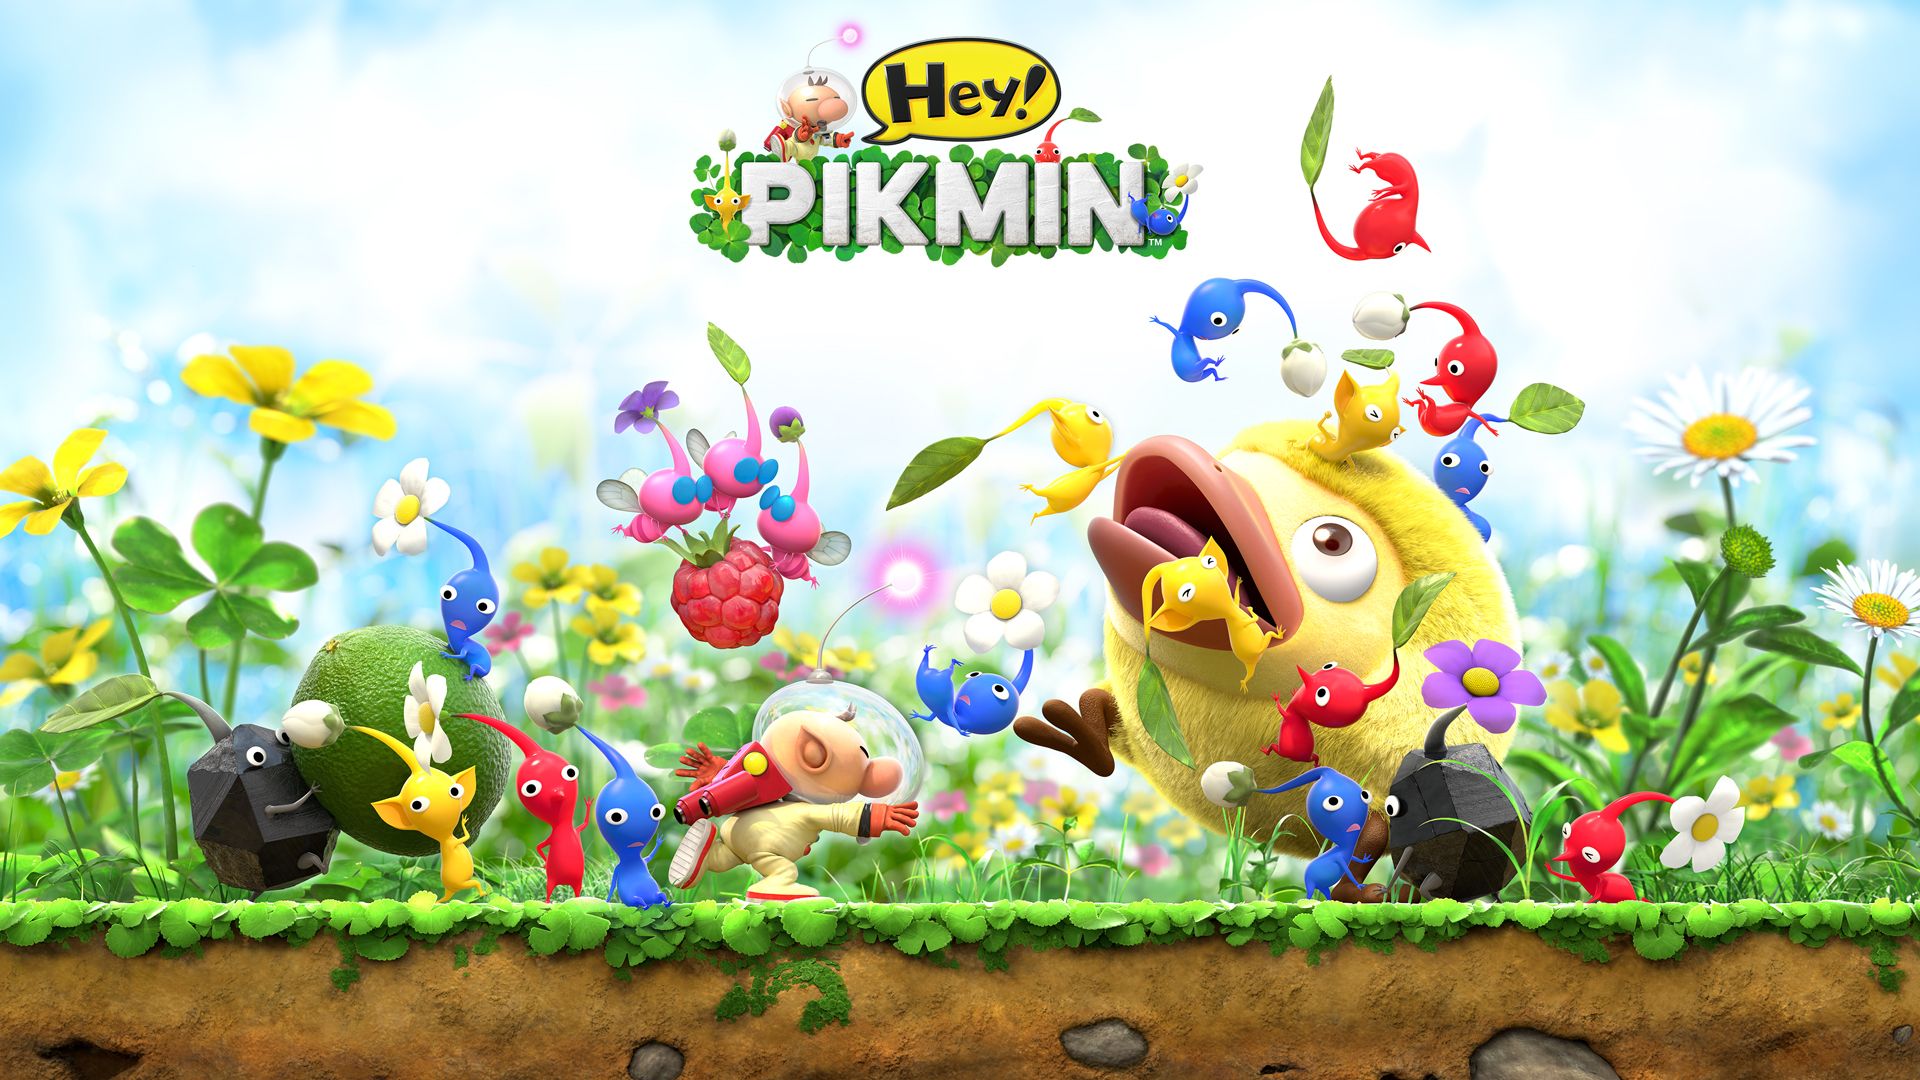 Free download Pikmin 3 HD Wallpaper and Background Image stmednet [1920x1080] for your Desktop, Mobile & Tablet. Explore Pikmin Wallpaper. Pikmin Wallpaper